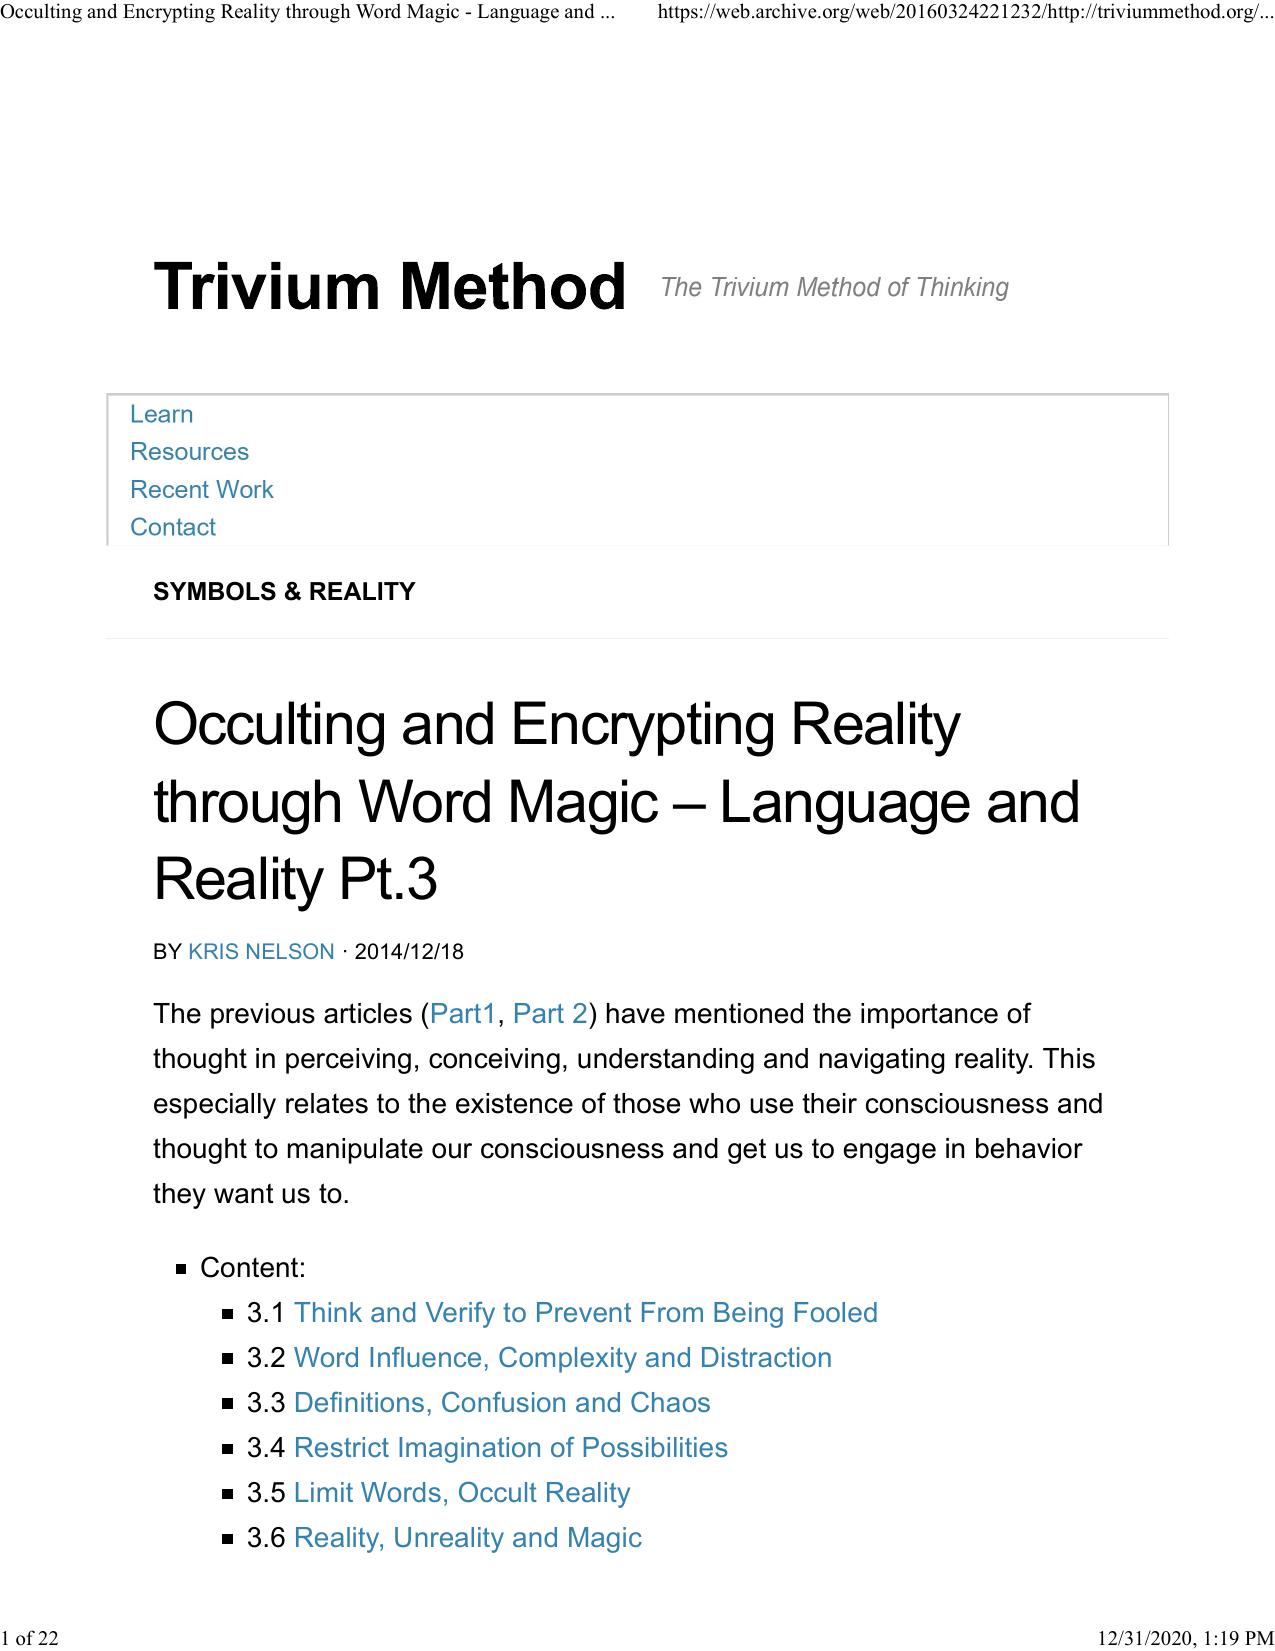 Occulting and Encrypting Reality through Word Magic - Language and Reality Pt.3